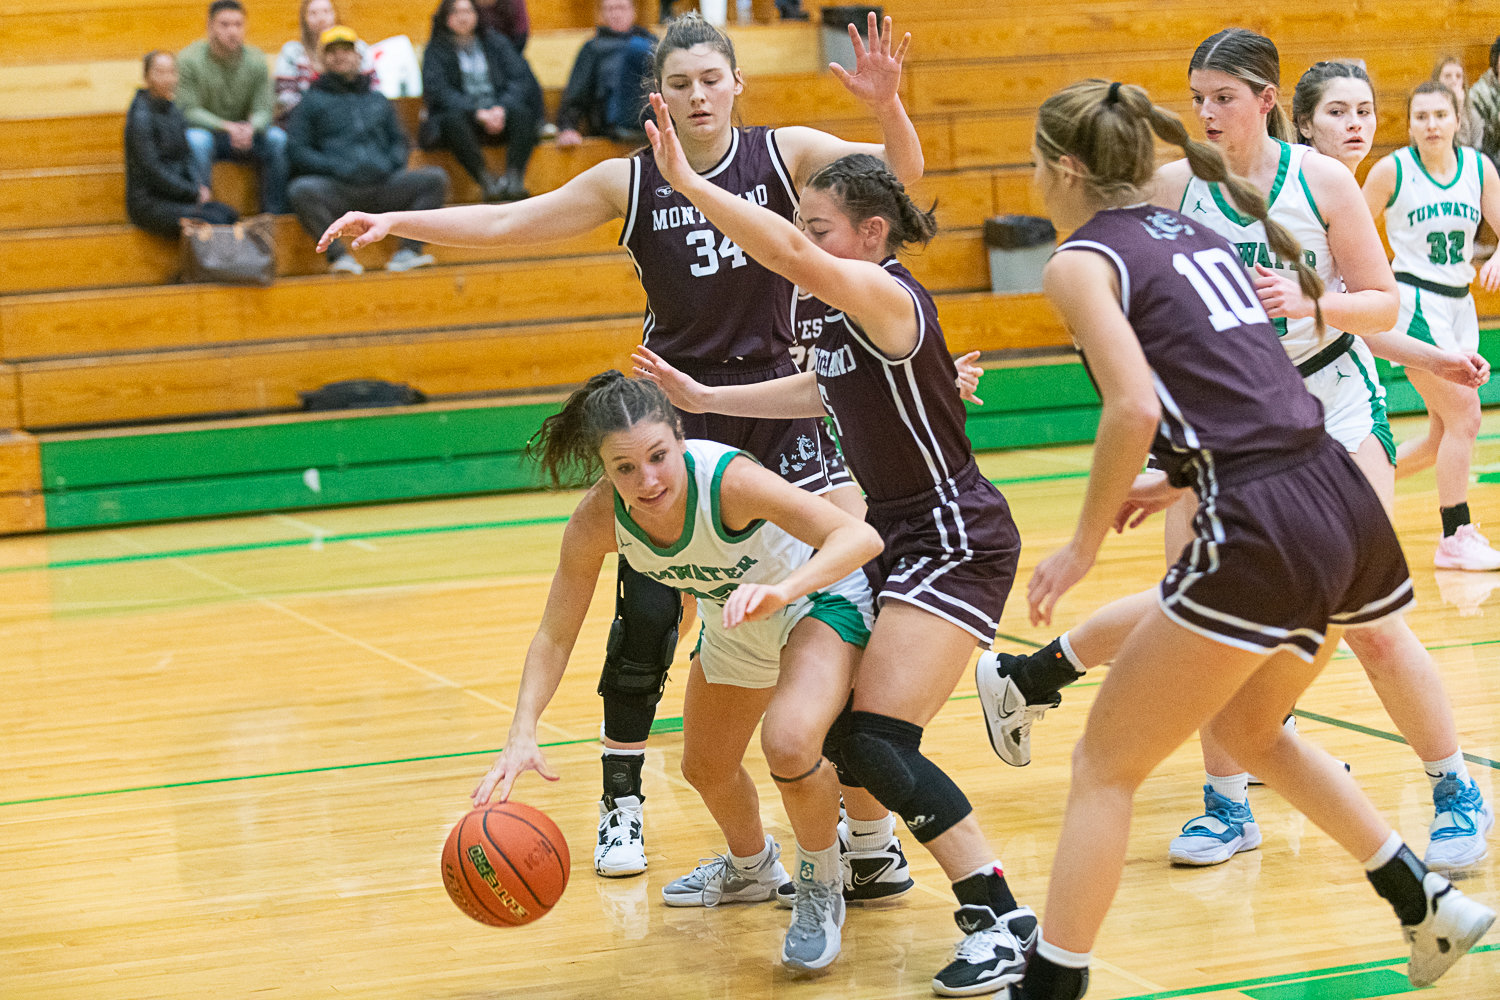 Regan Brewer is trapped under the basket by three Montesano defenders during the first quarter of Tumwater's 37-21 loss to the Bulldogs on Dec. 22.